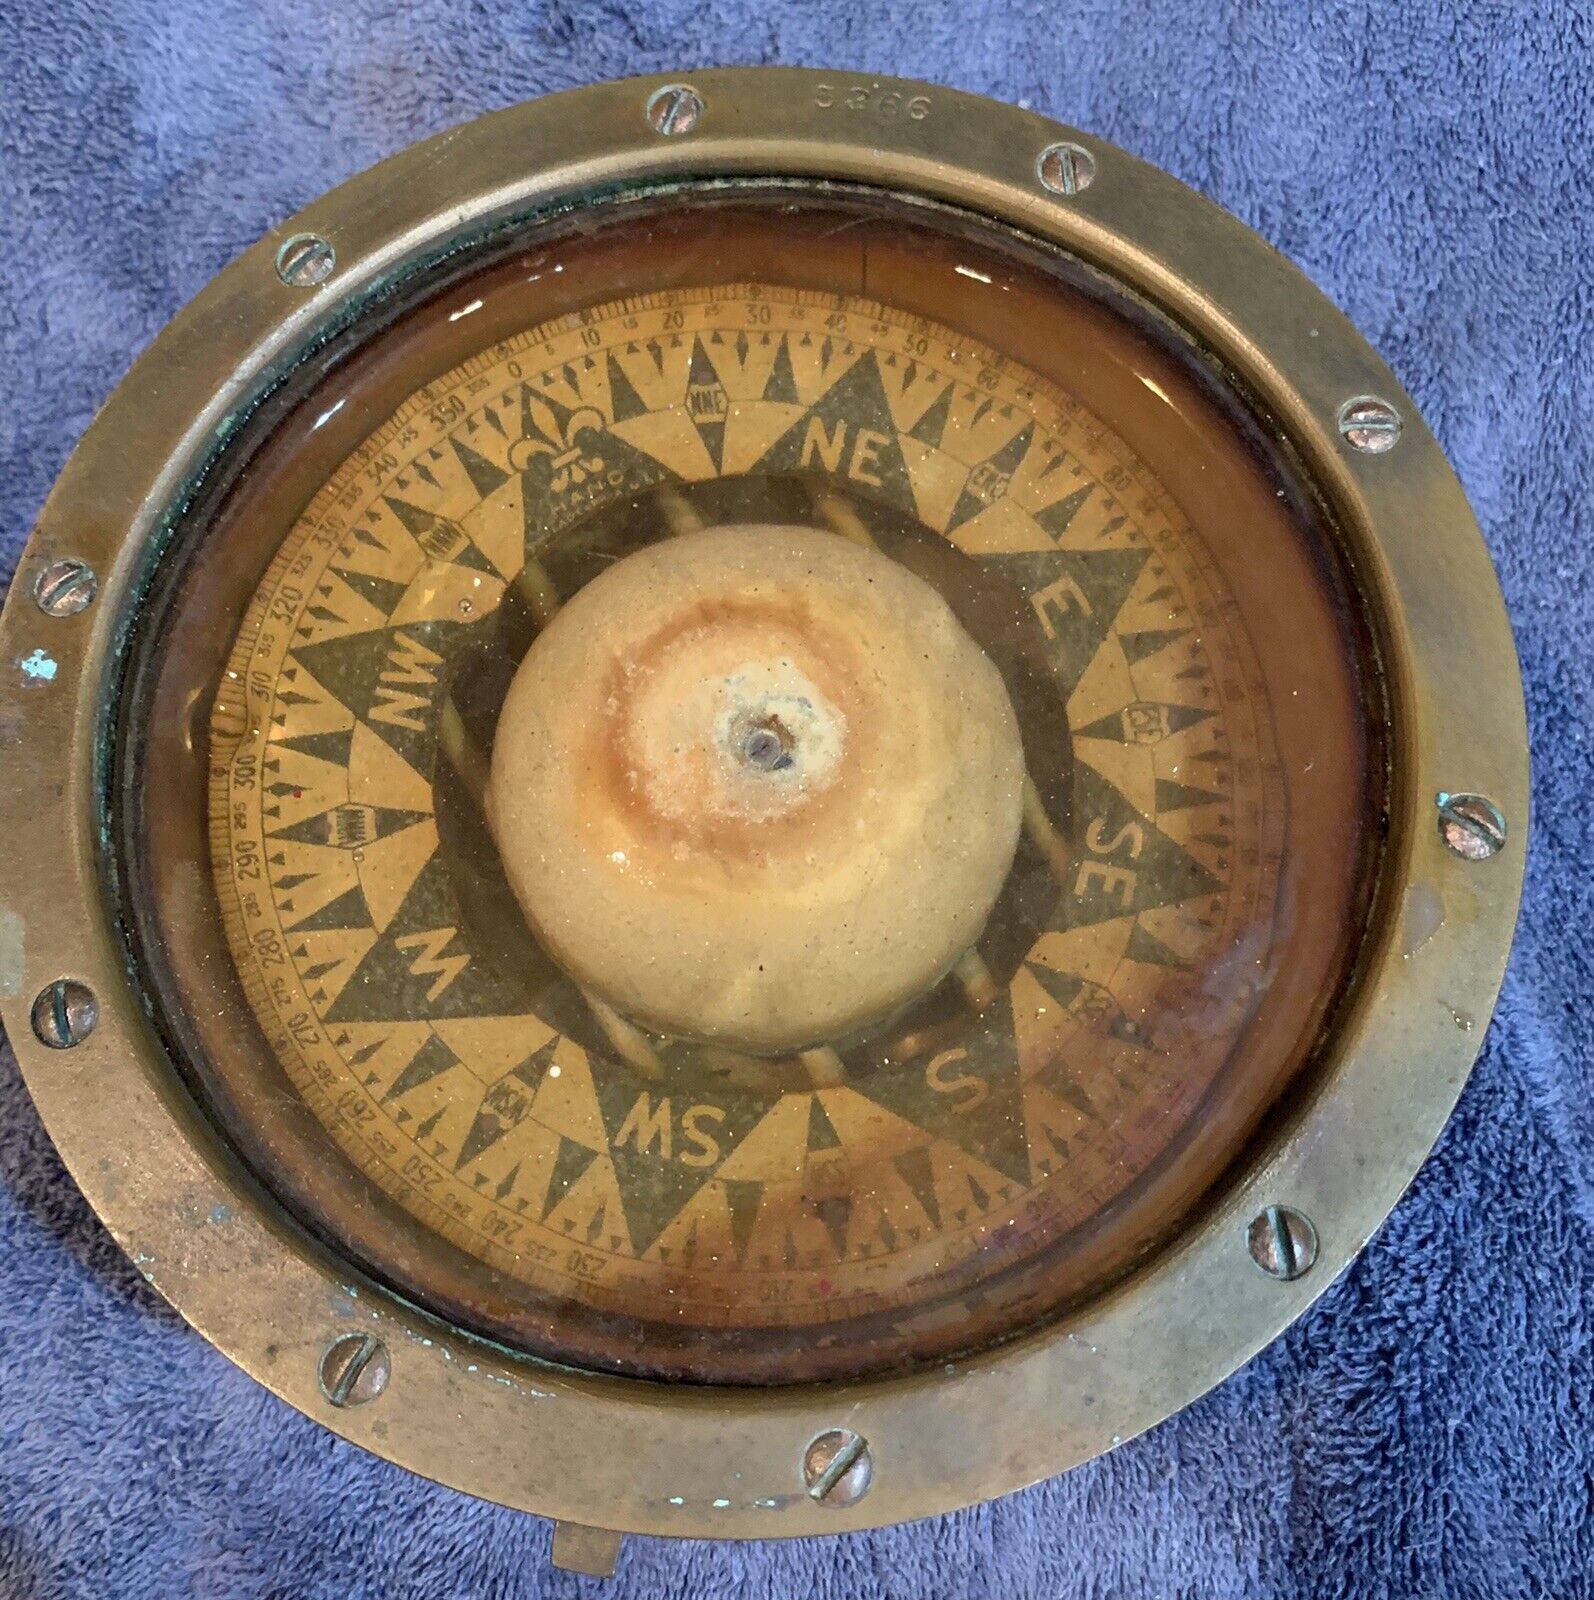 Vintage US Naval Magnetic Ship Hand Compass #5366 Found While Diving Off U.S